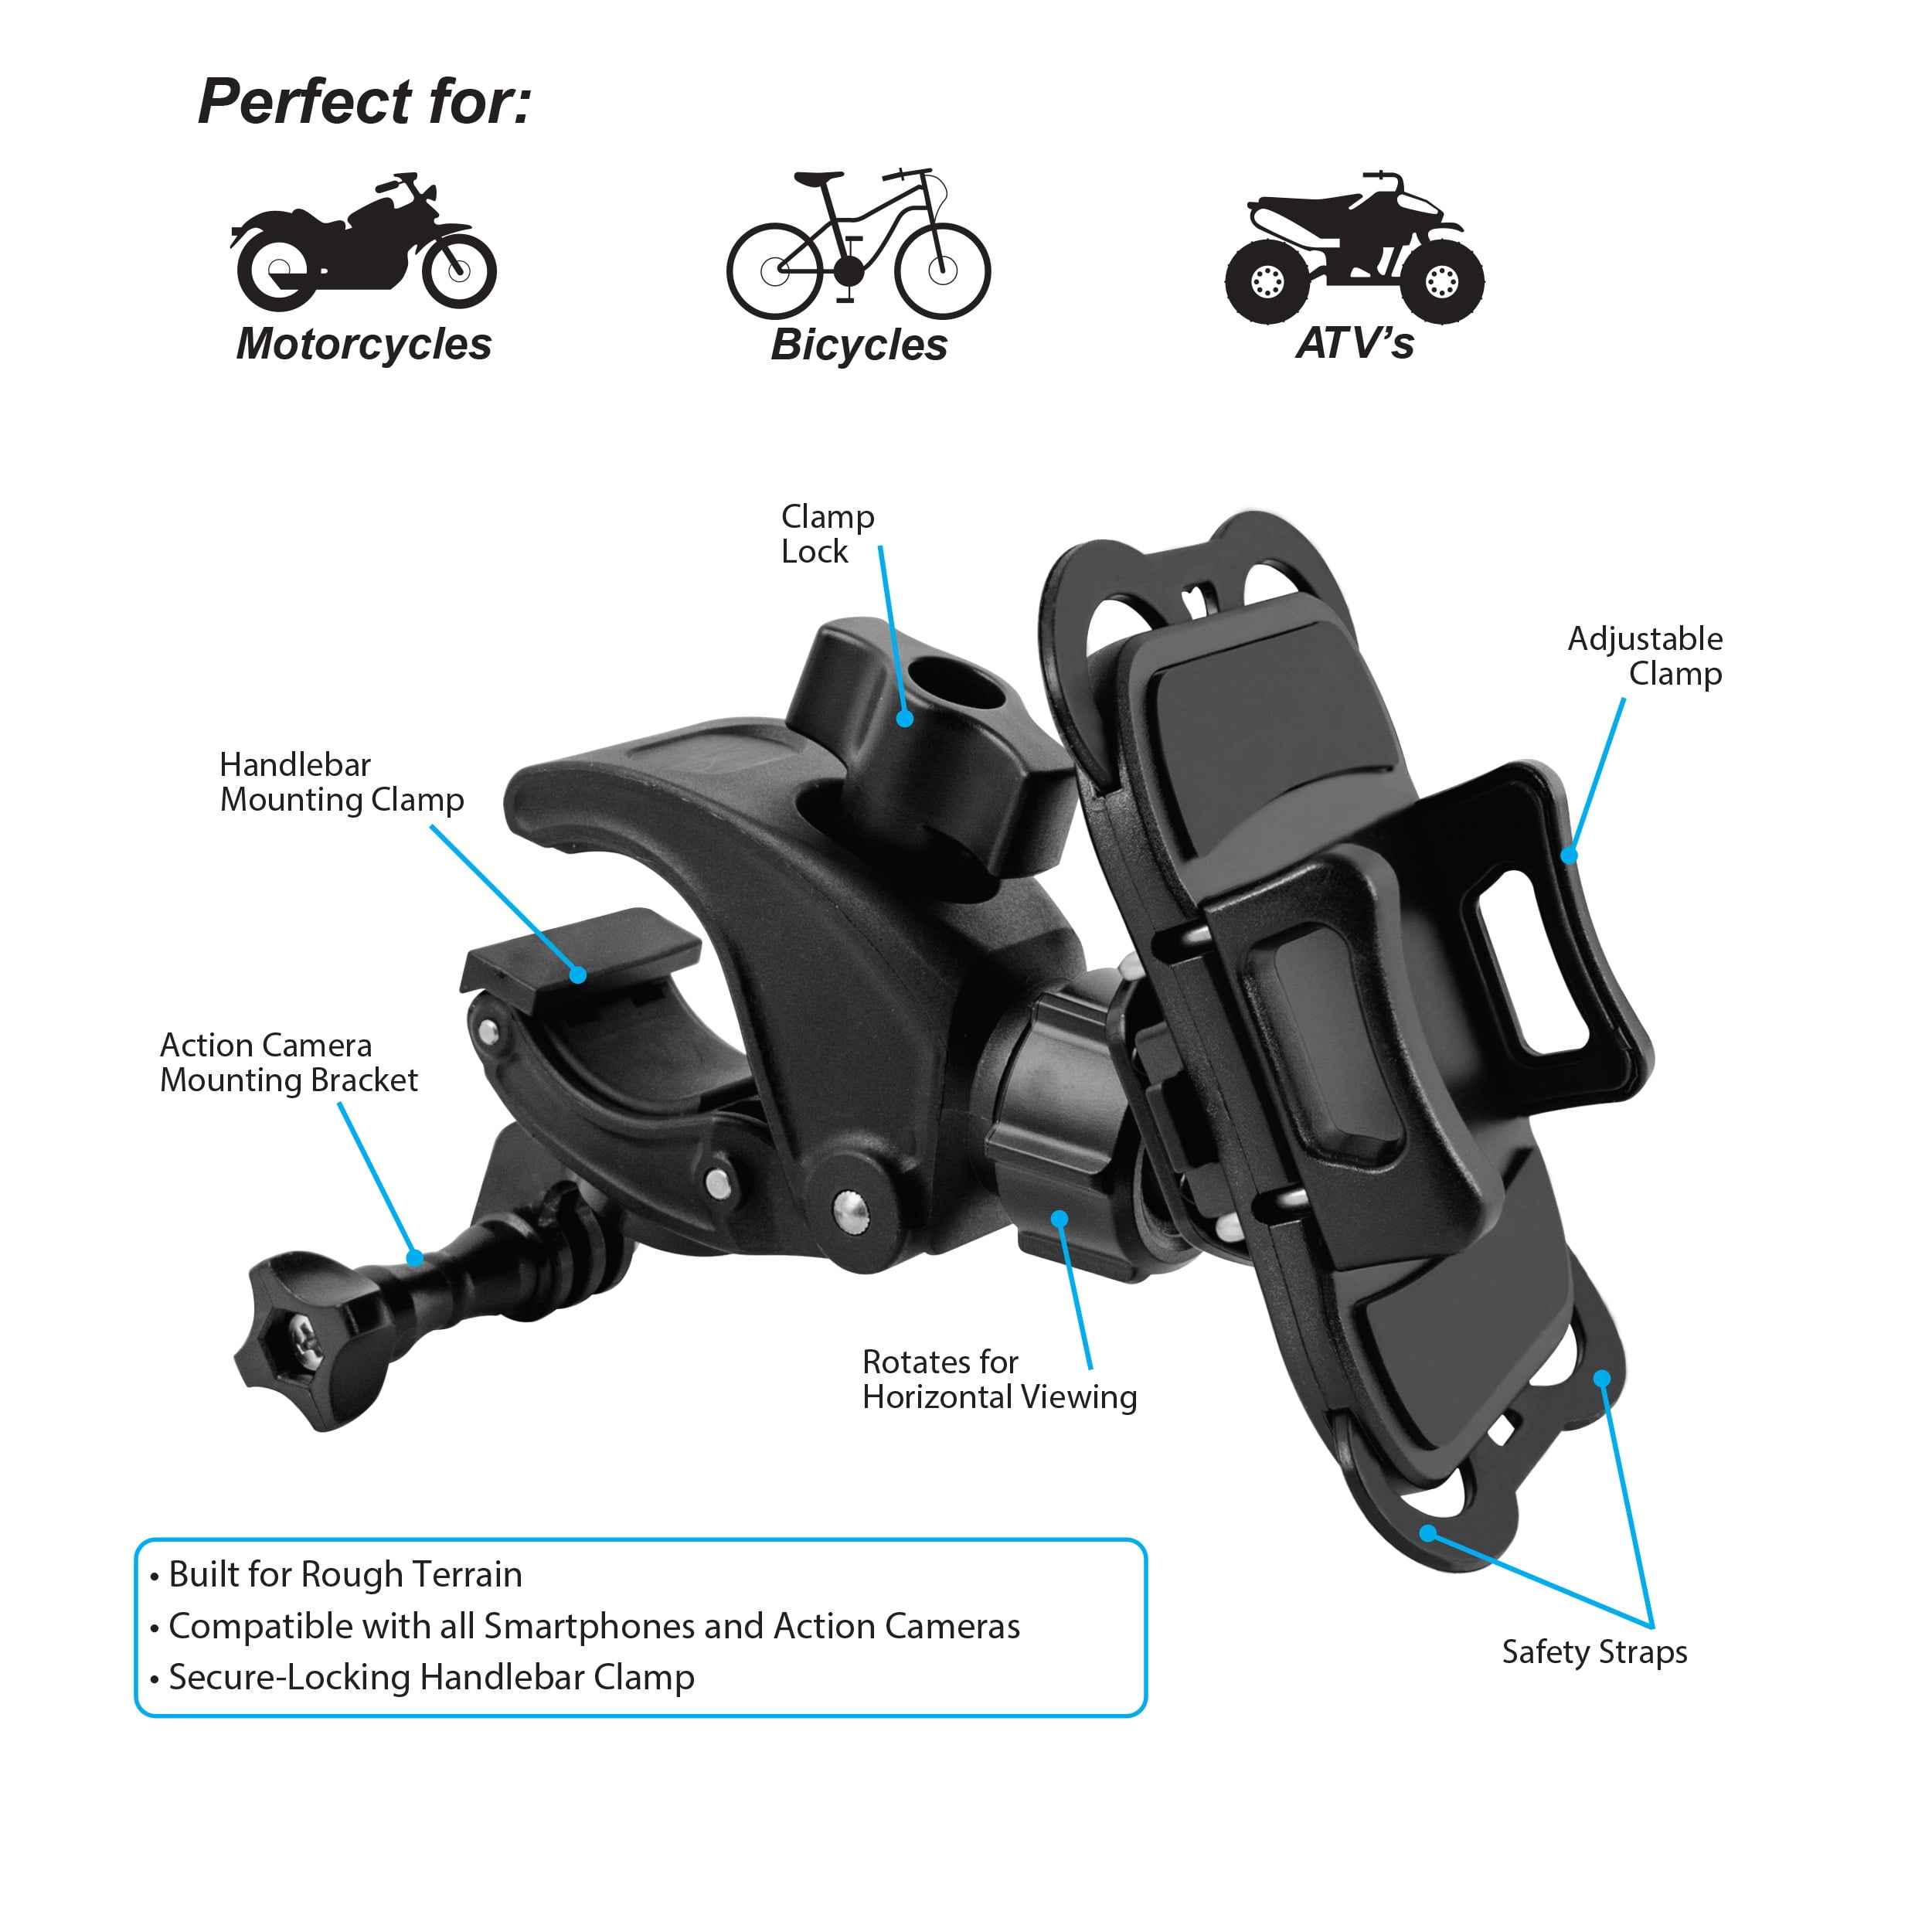 Bike Phone Mount,Motorcycle Phone Holder for Electric,Mountain,Scooter,and Dirt Bikes,360°Rotatable,Bike Accessories,1 Second Lock,Bicycle Phone Holder for 4.7-7.0 Cellphone SHARKSPEED 